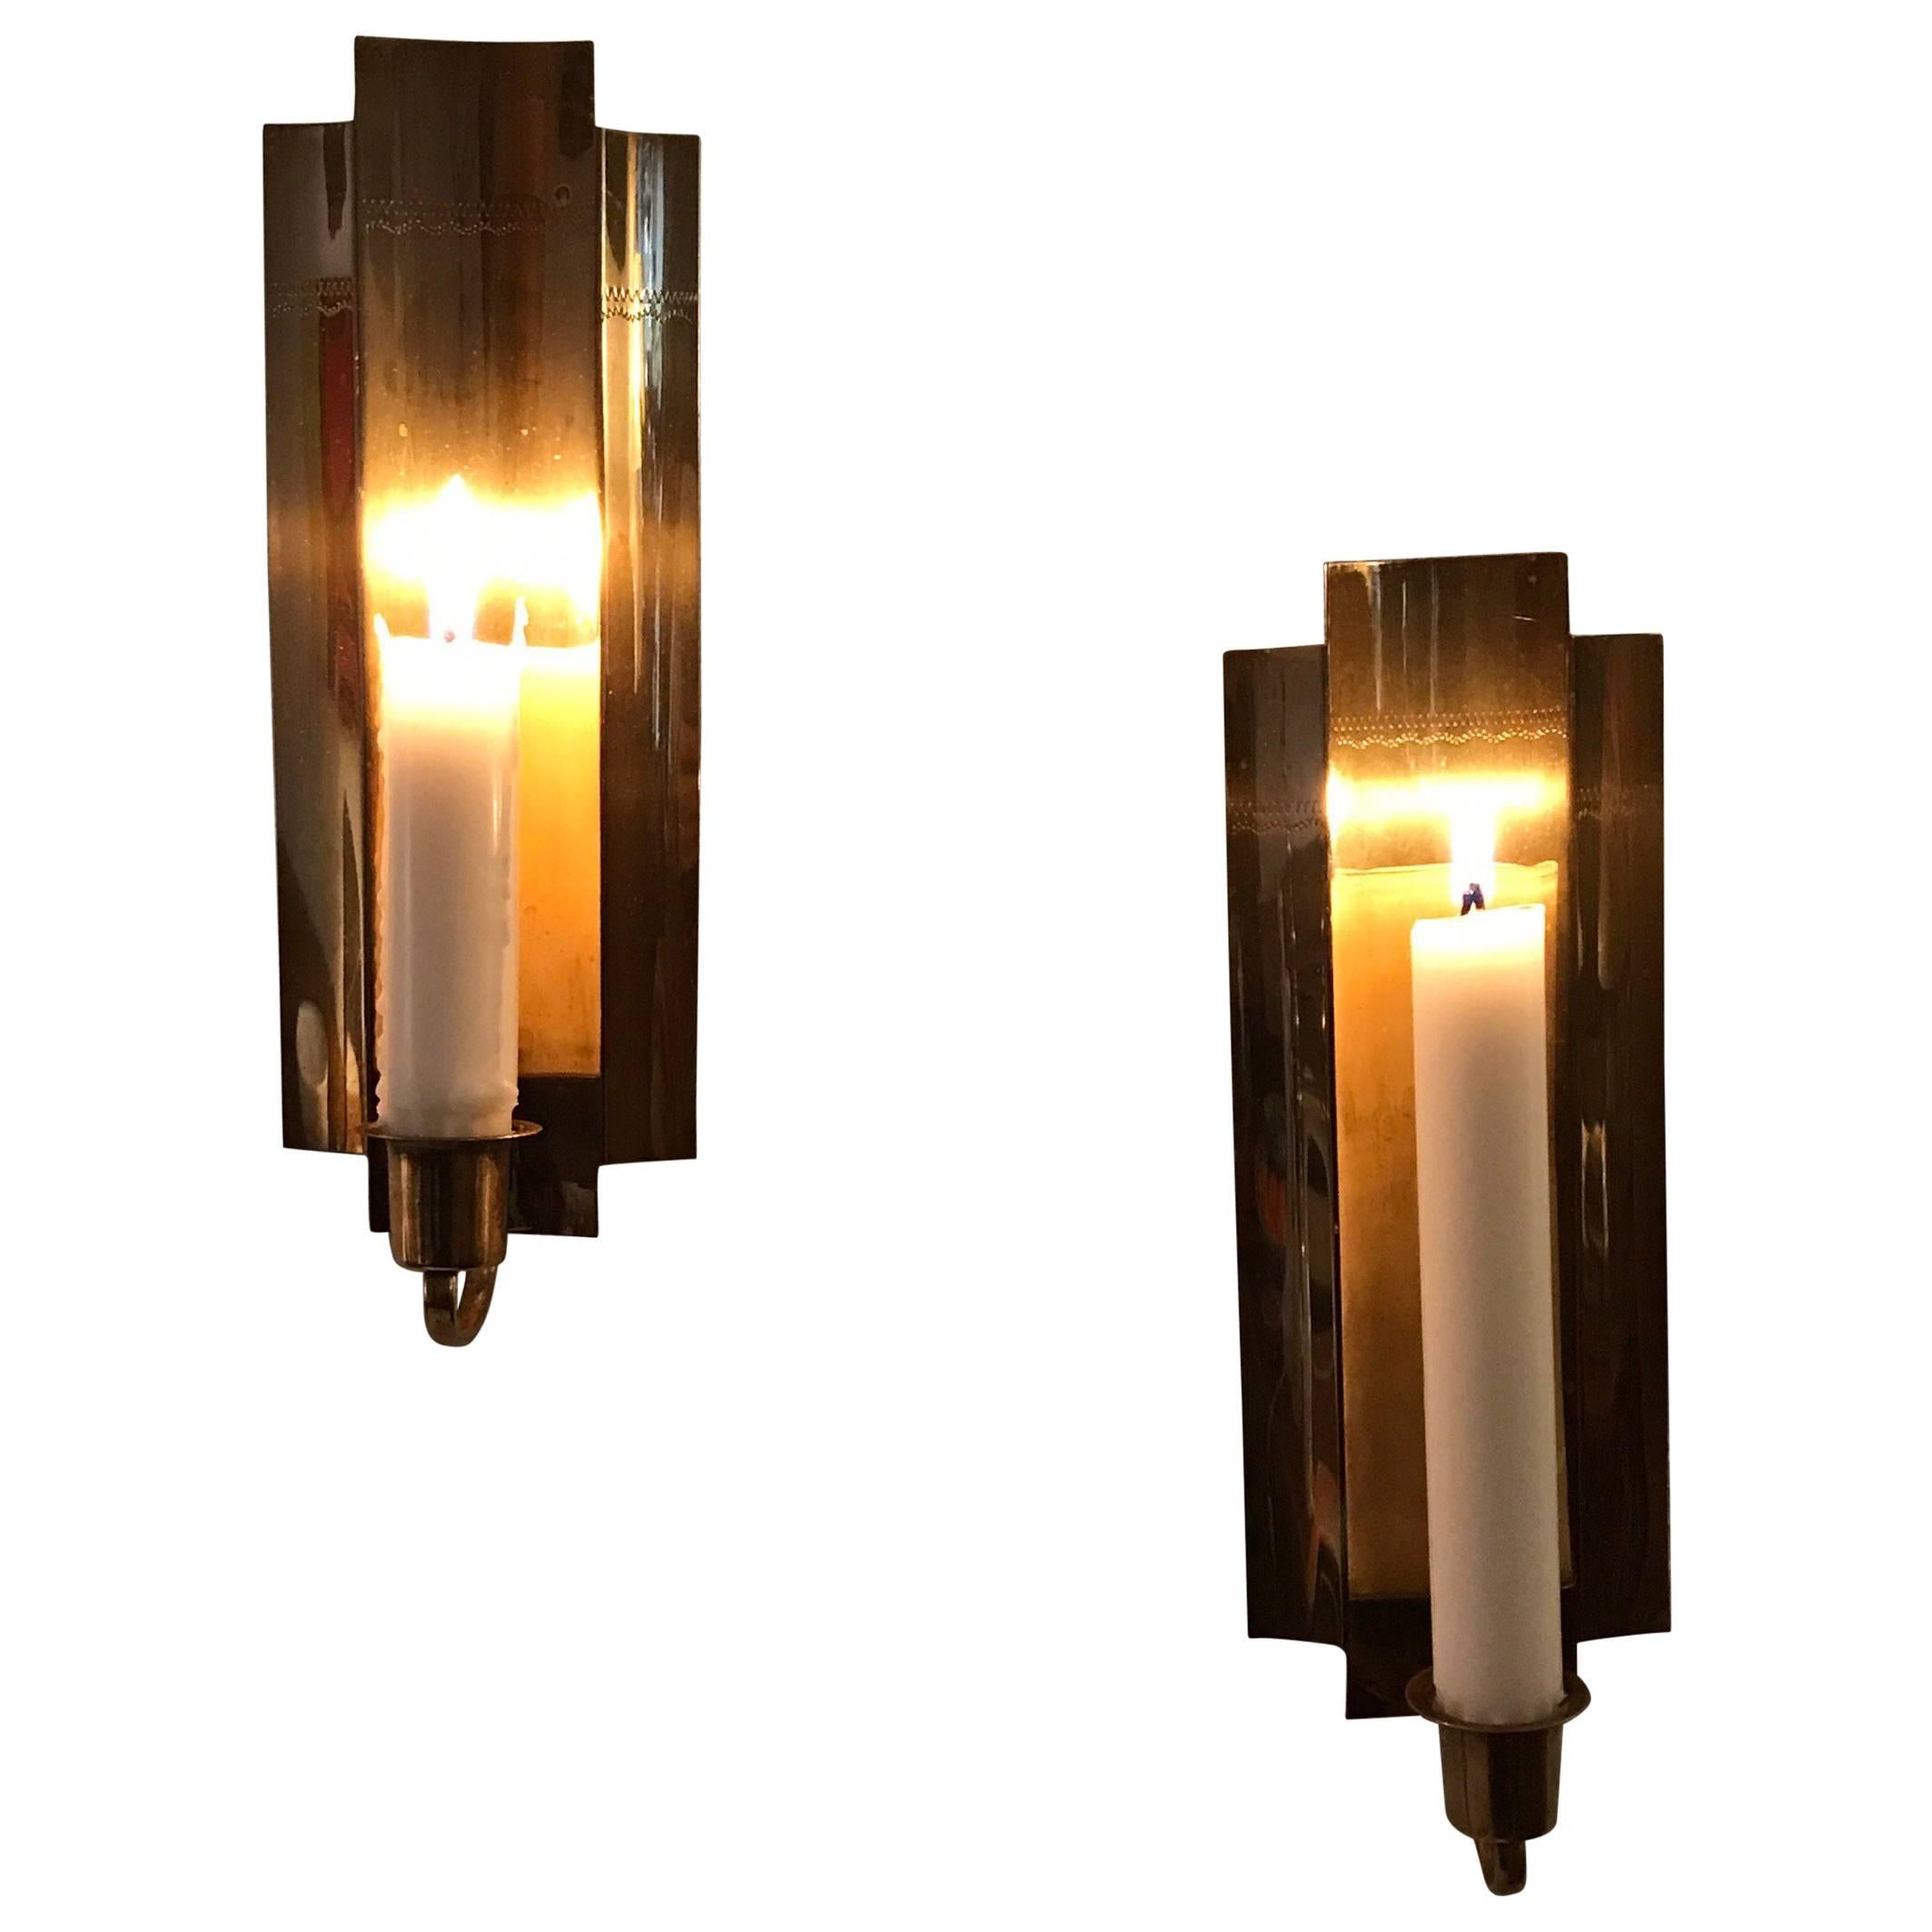 Pair of Swedish Brass Candle Wall Sconces, 1950 For Sale